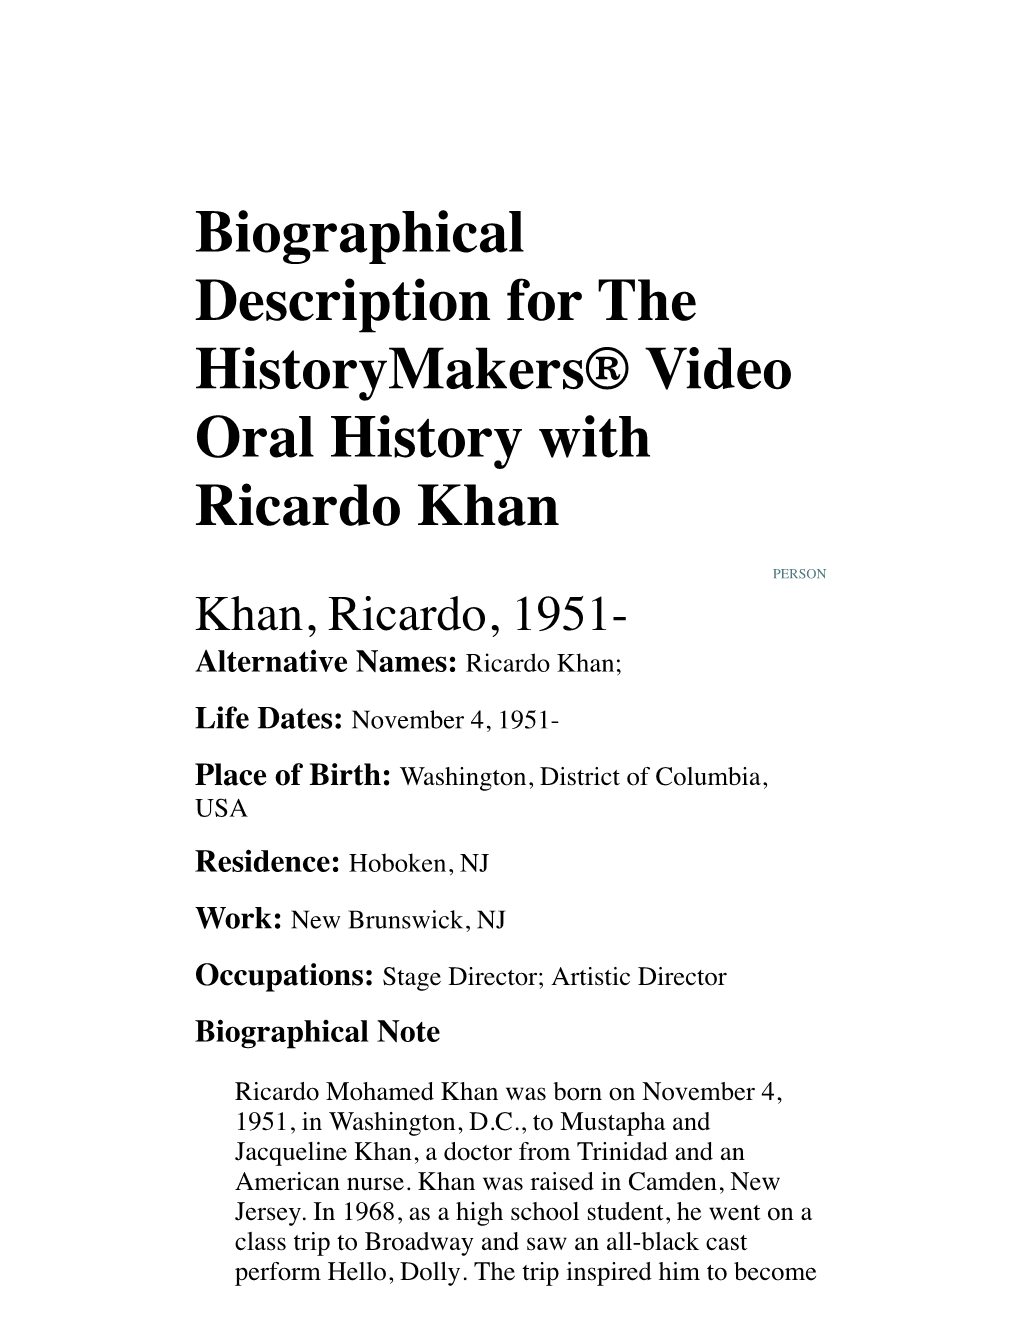 Biographical Description for the Historymakers® Video Oral History with Ricardo Khan